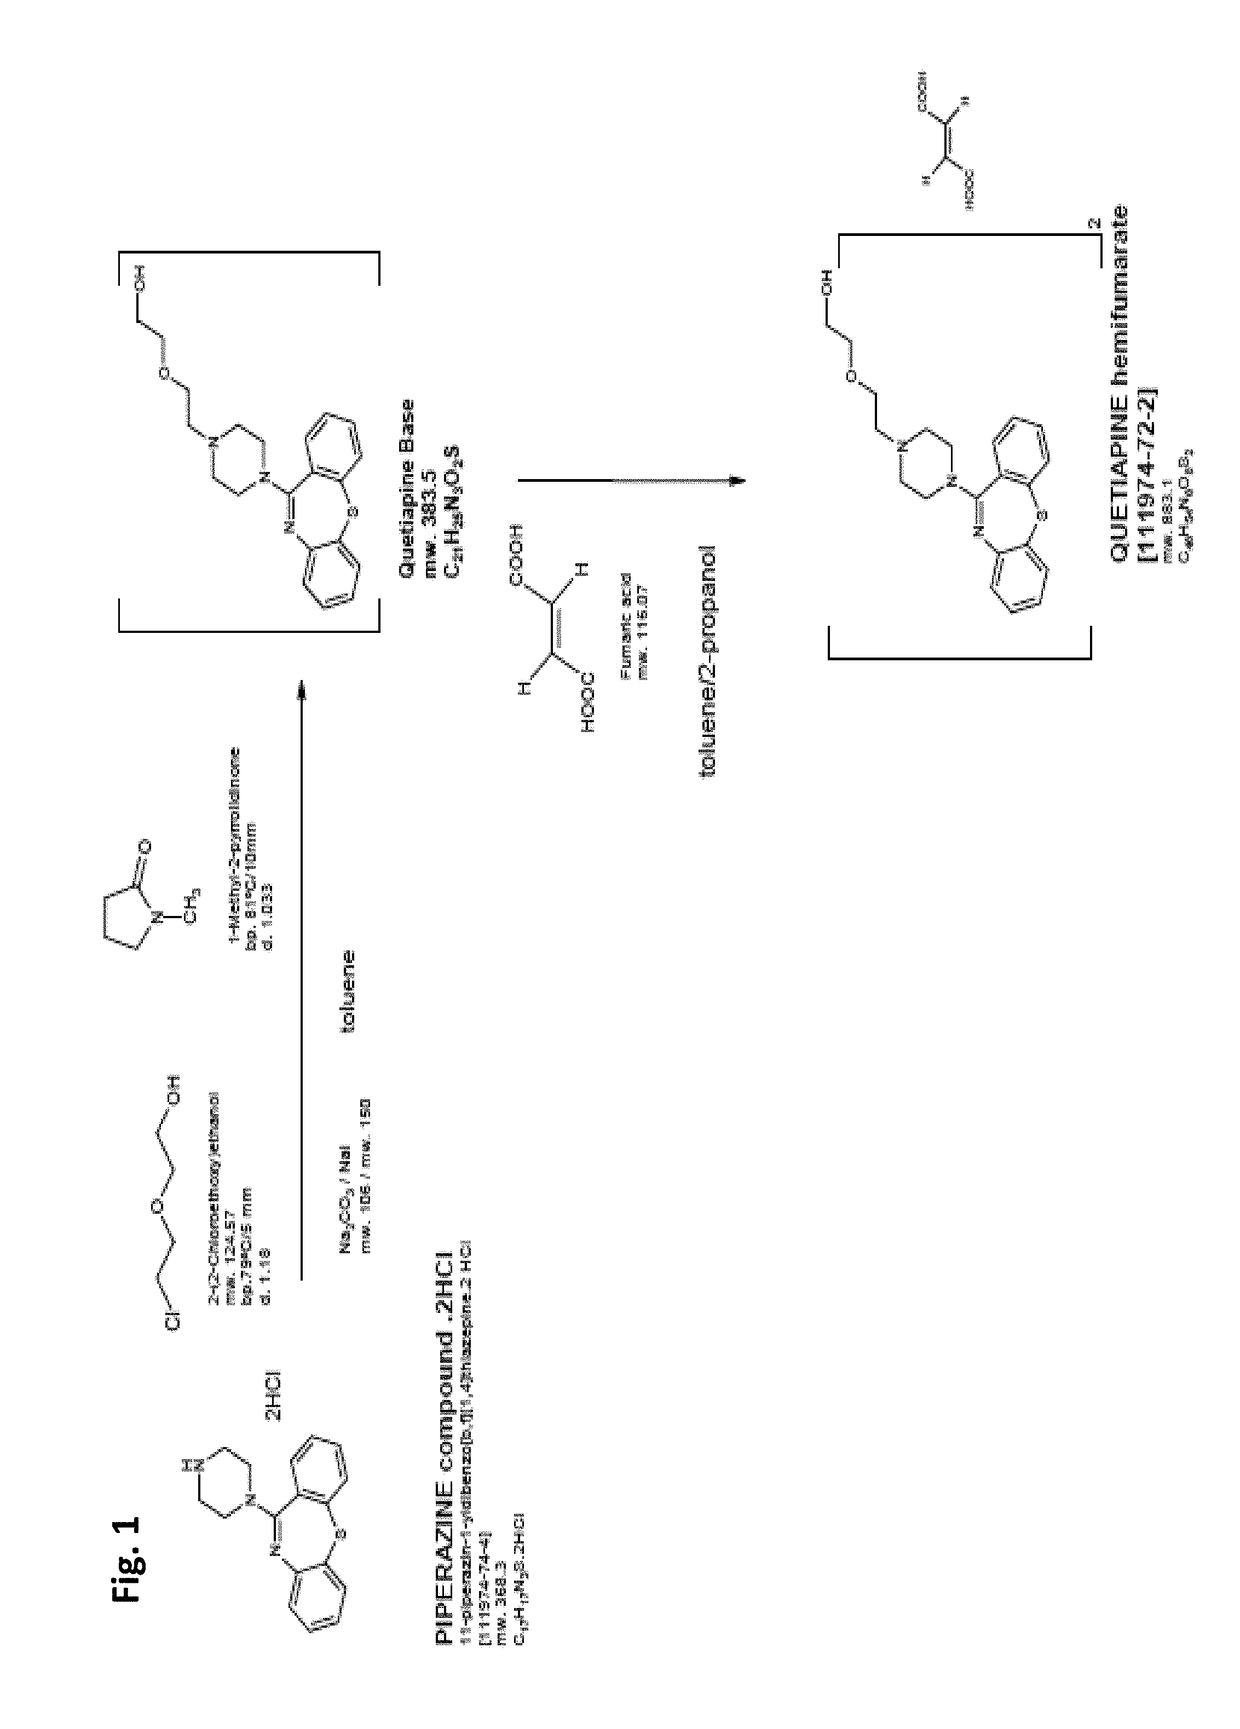 Oral quetiapine suspension formulations with extended shelf life and enhanced bioavailability